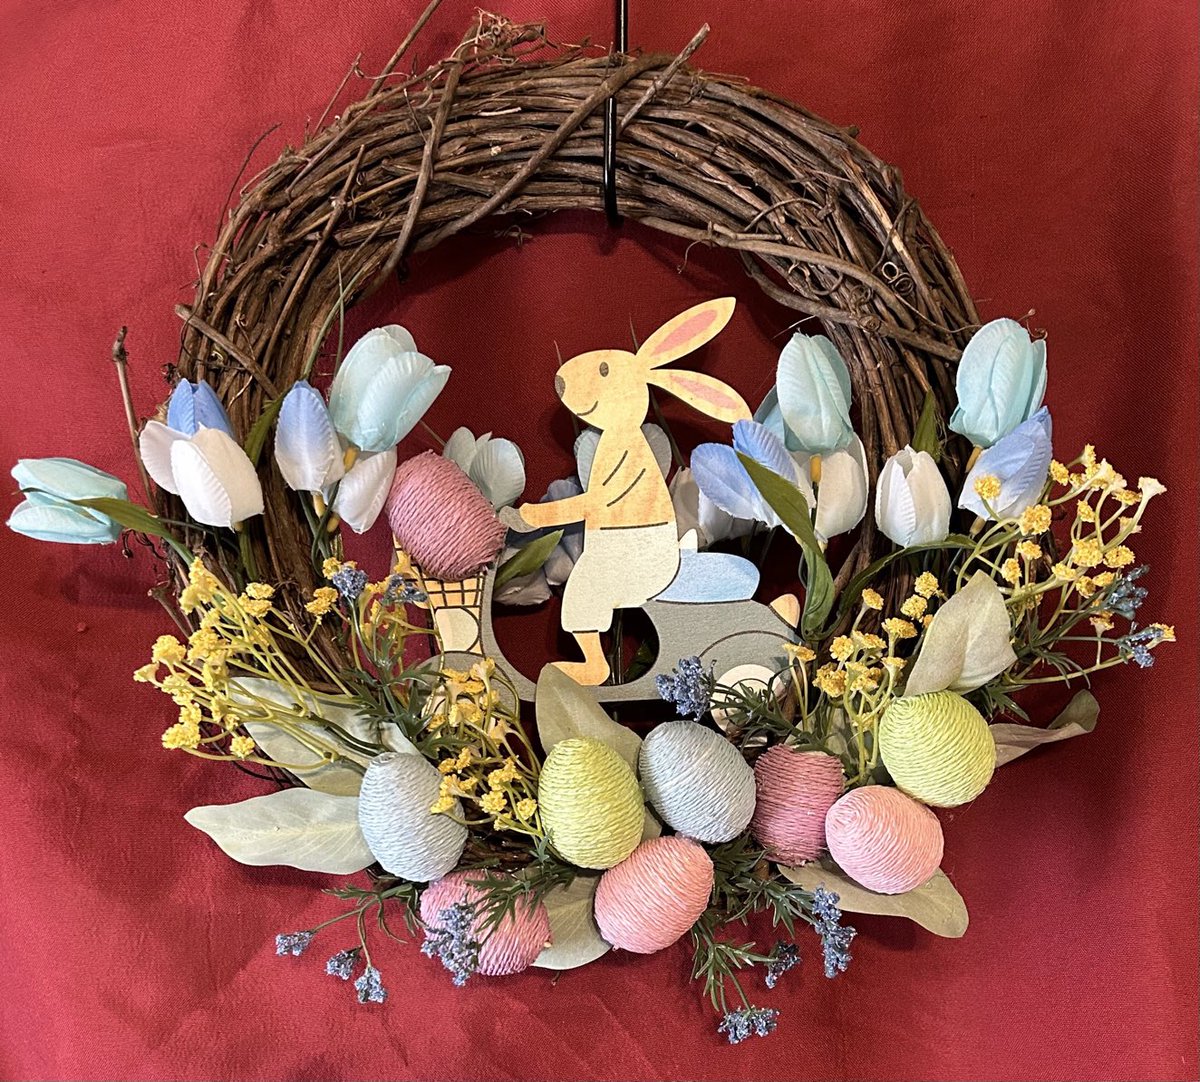 Excited to share this item from my #etsy shop: Scooter bunny #countryfarmhouse #tulips #decoration #spring #easter etsy.me/3lB24Cz